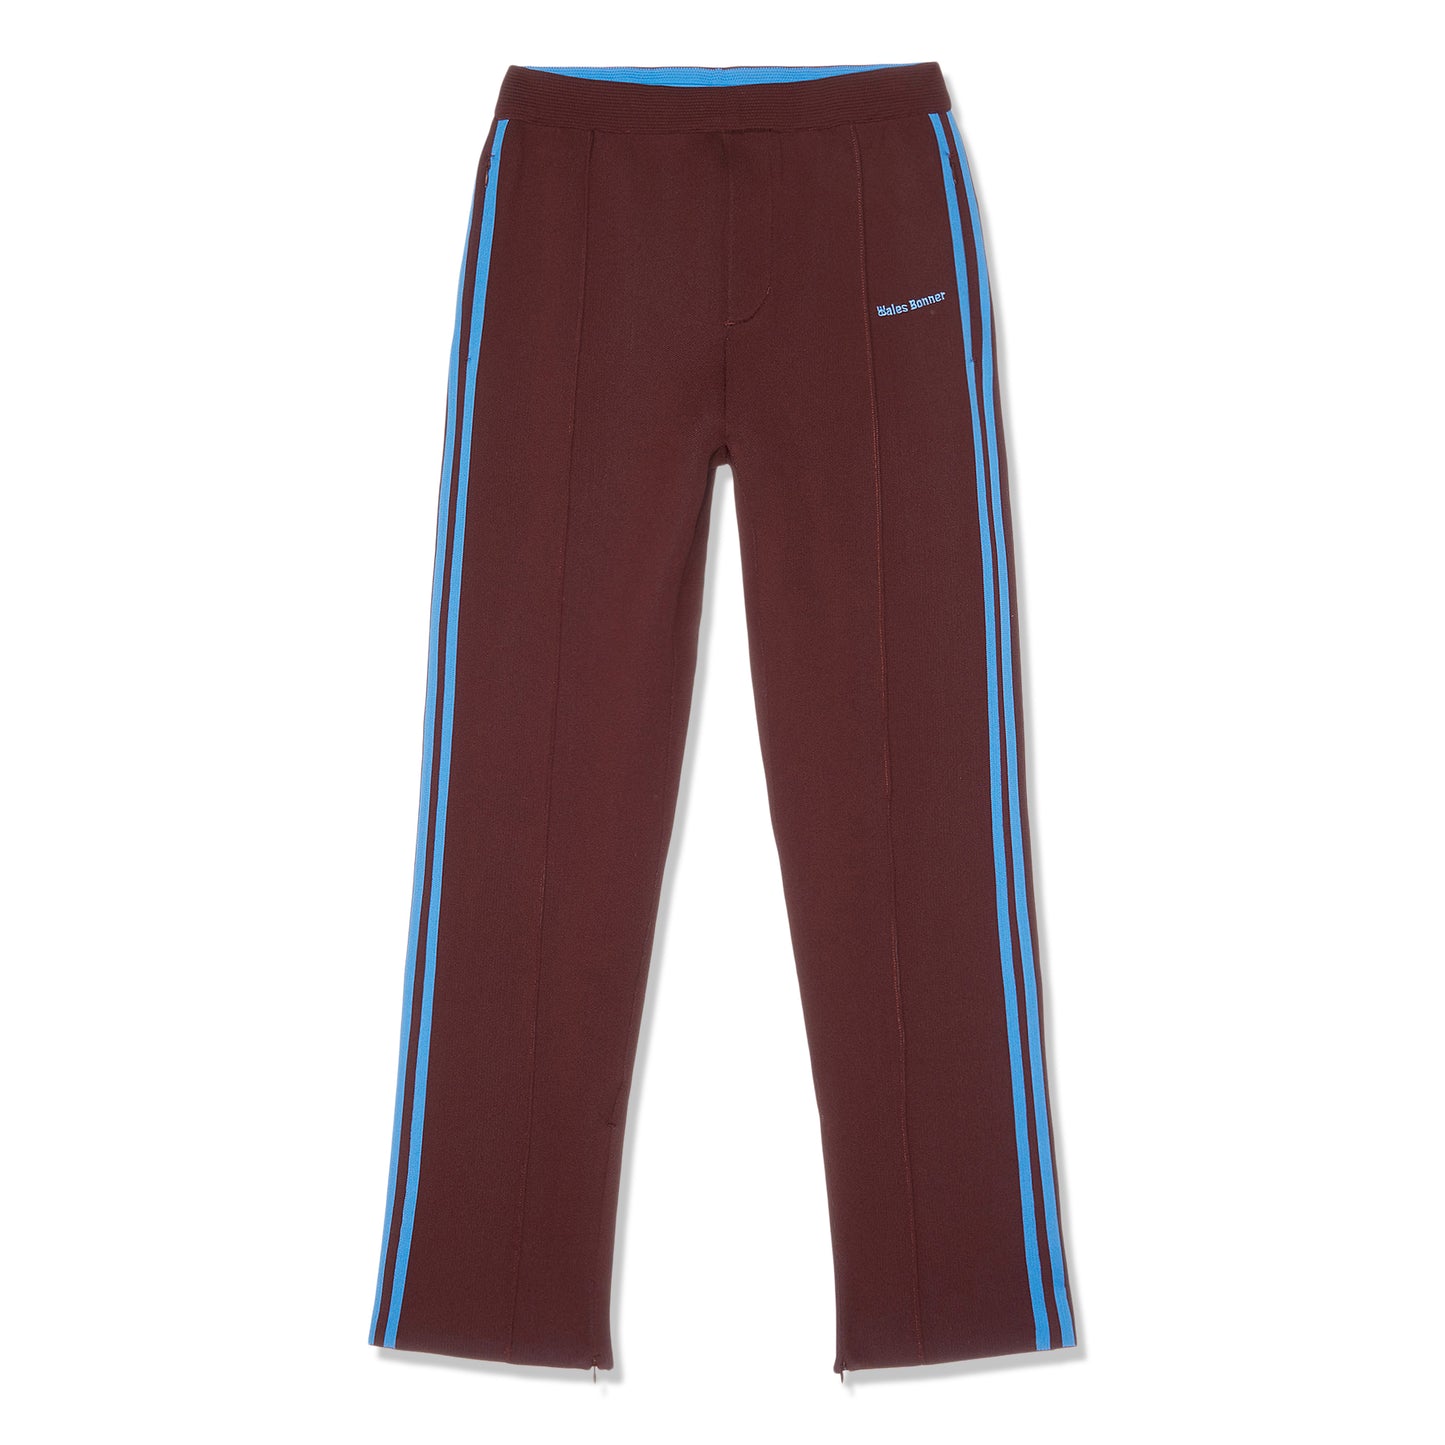 Adidas x Wales Bonner Knit Track Pant (Mystery Brown)